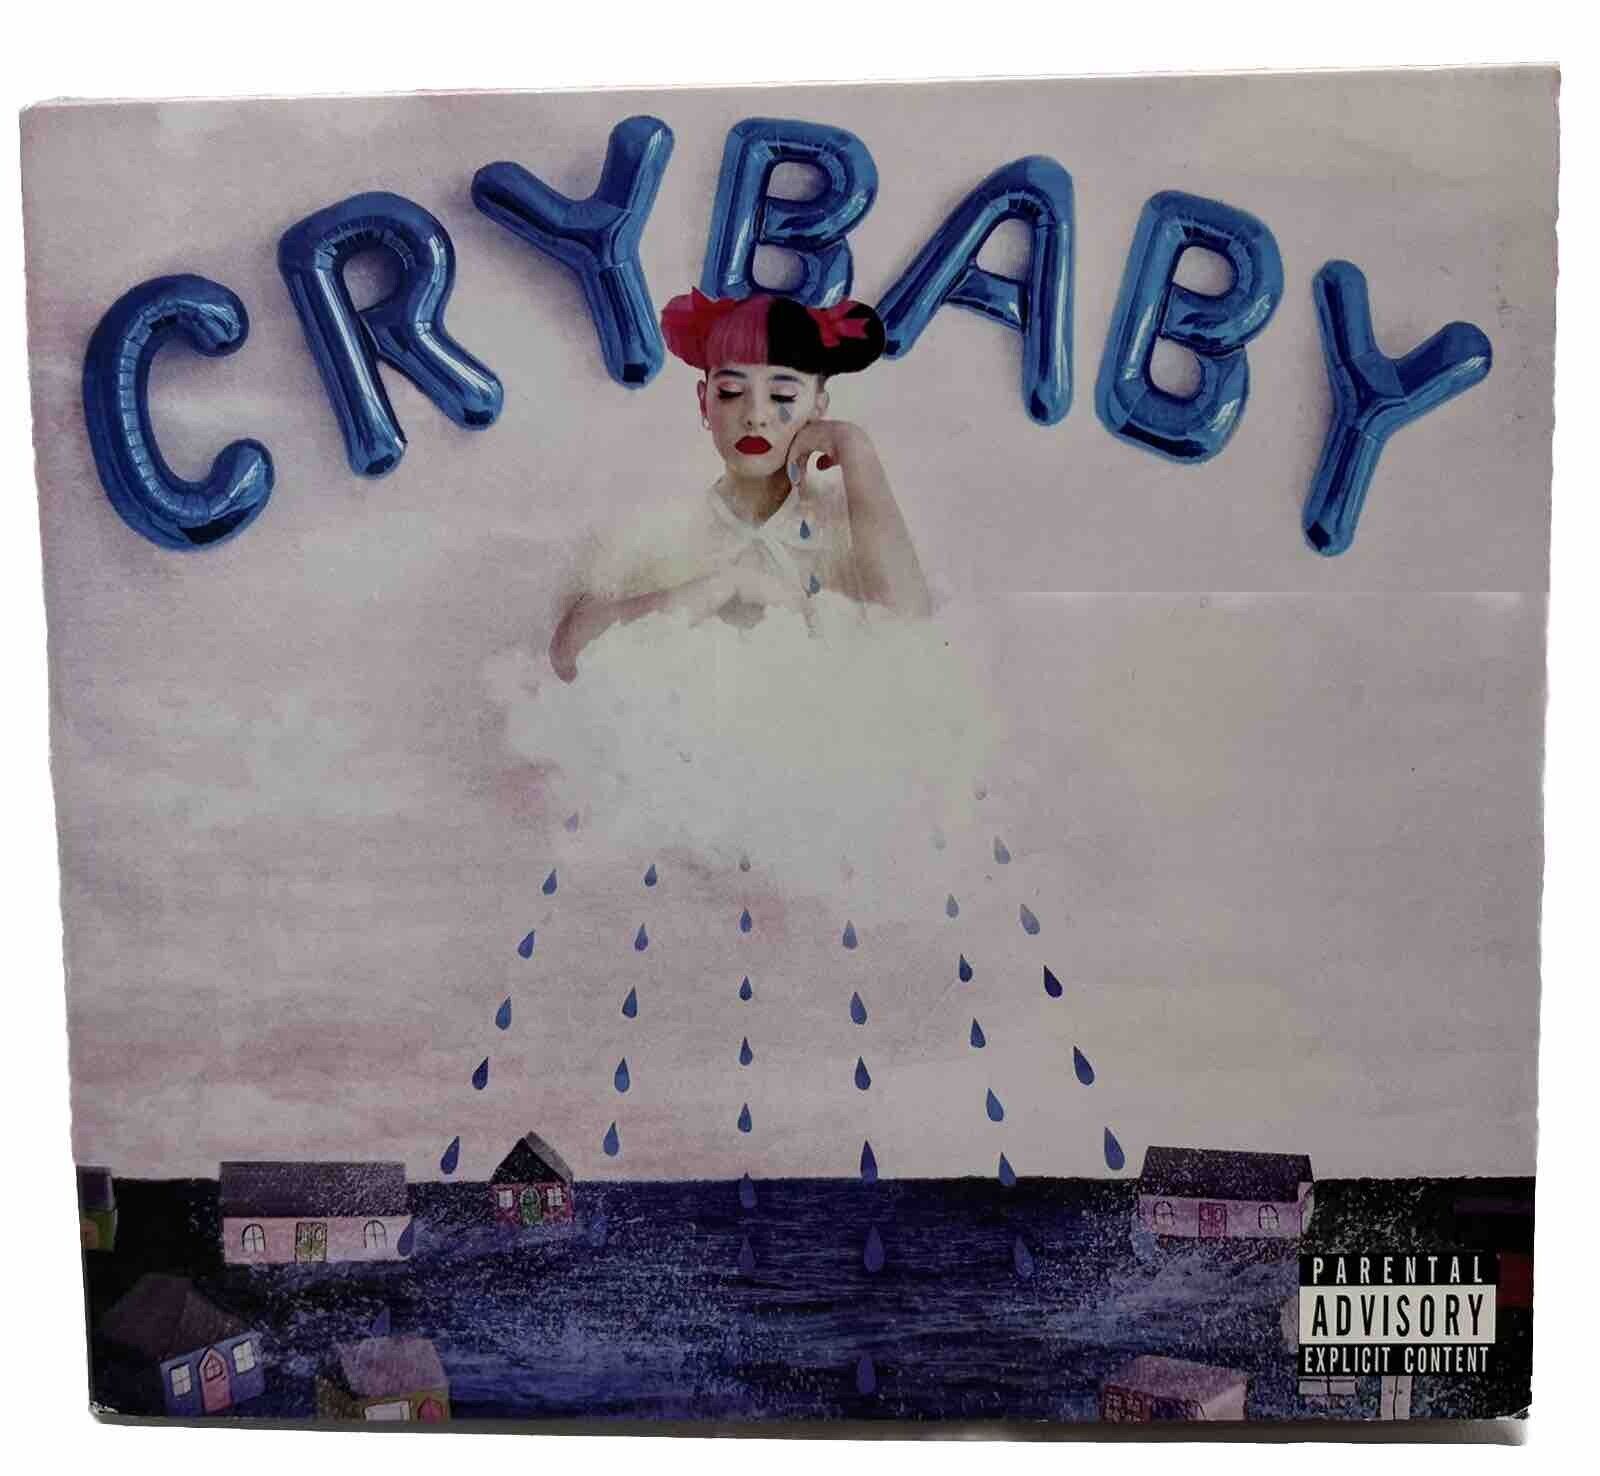 Melanie Martinez Cry Baby Storybook Cd Edition Rare Collectible